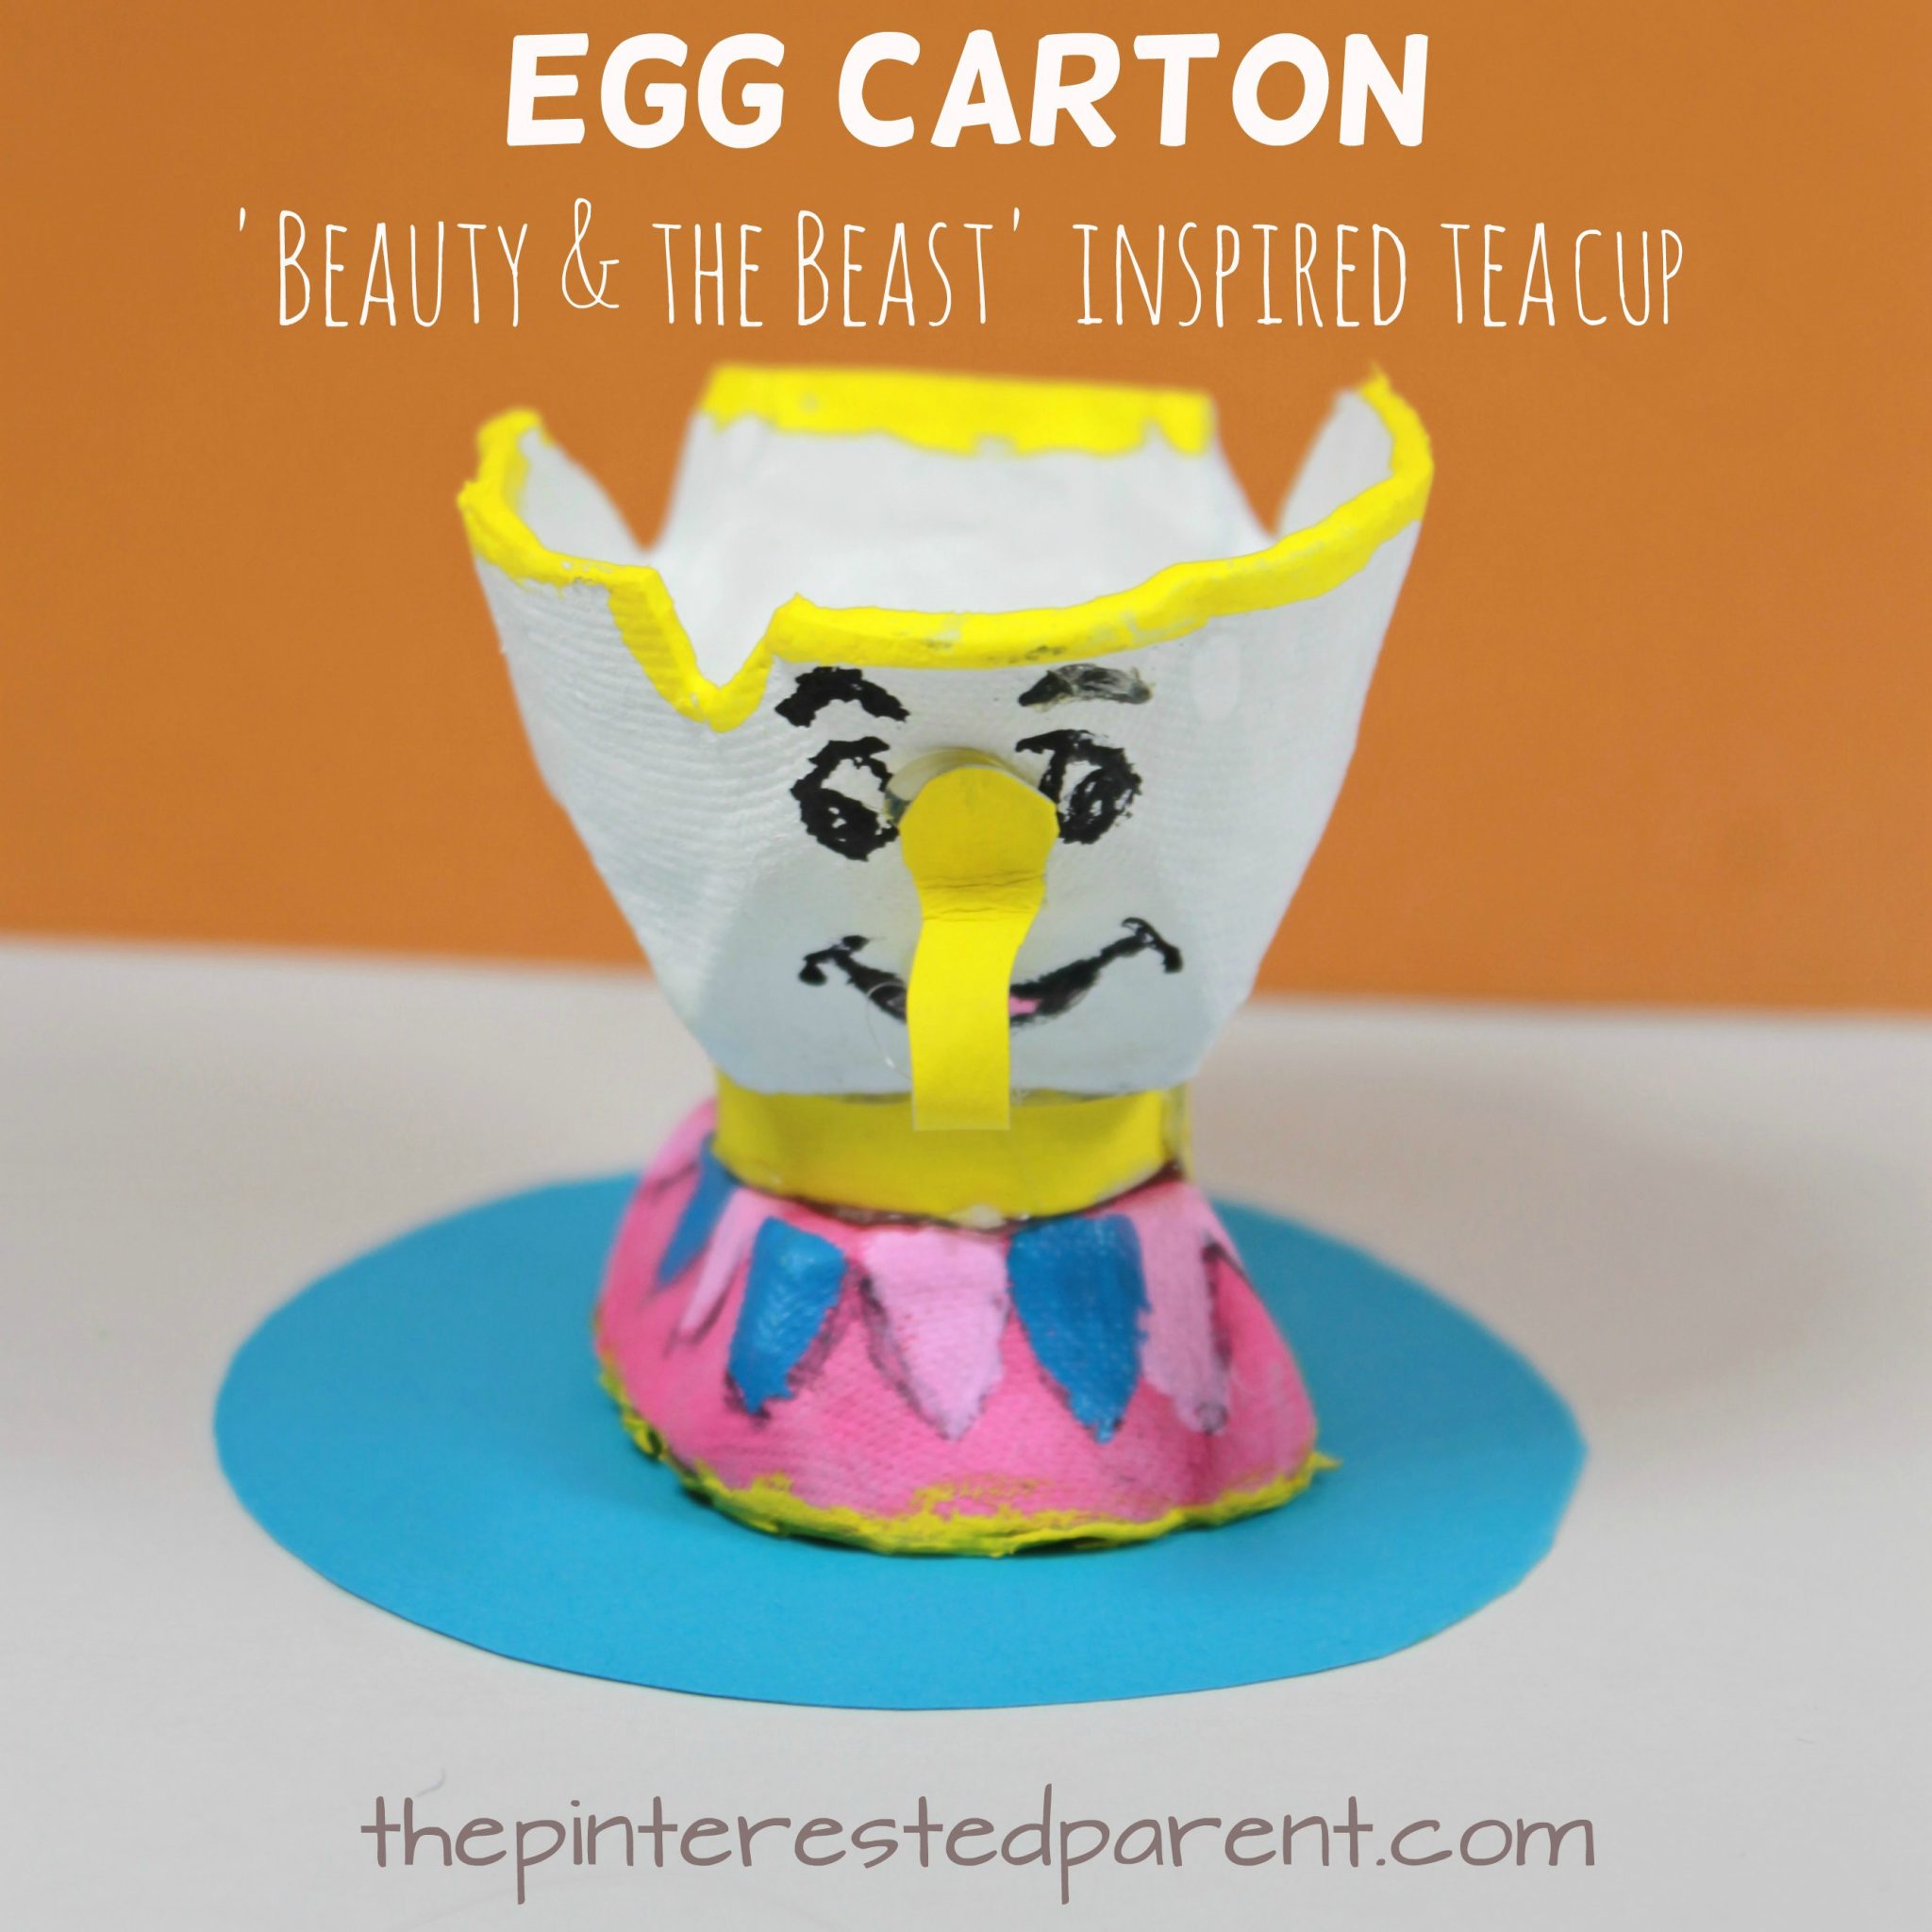 Egg Carton 'Beauty & the Beast' Chip inspired teacup craft. Kid's character inspired arts and crafts. Recyclable crafts